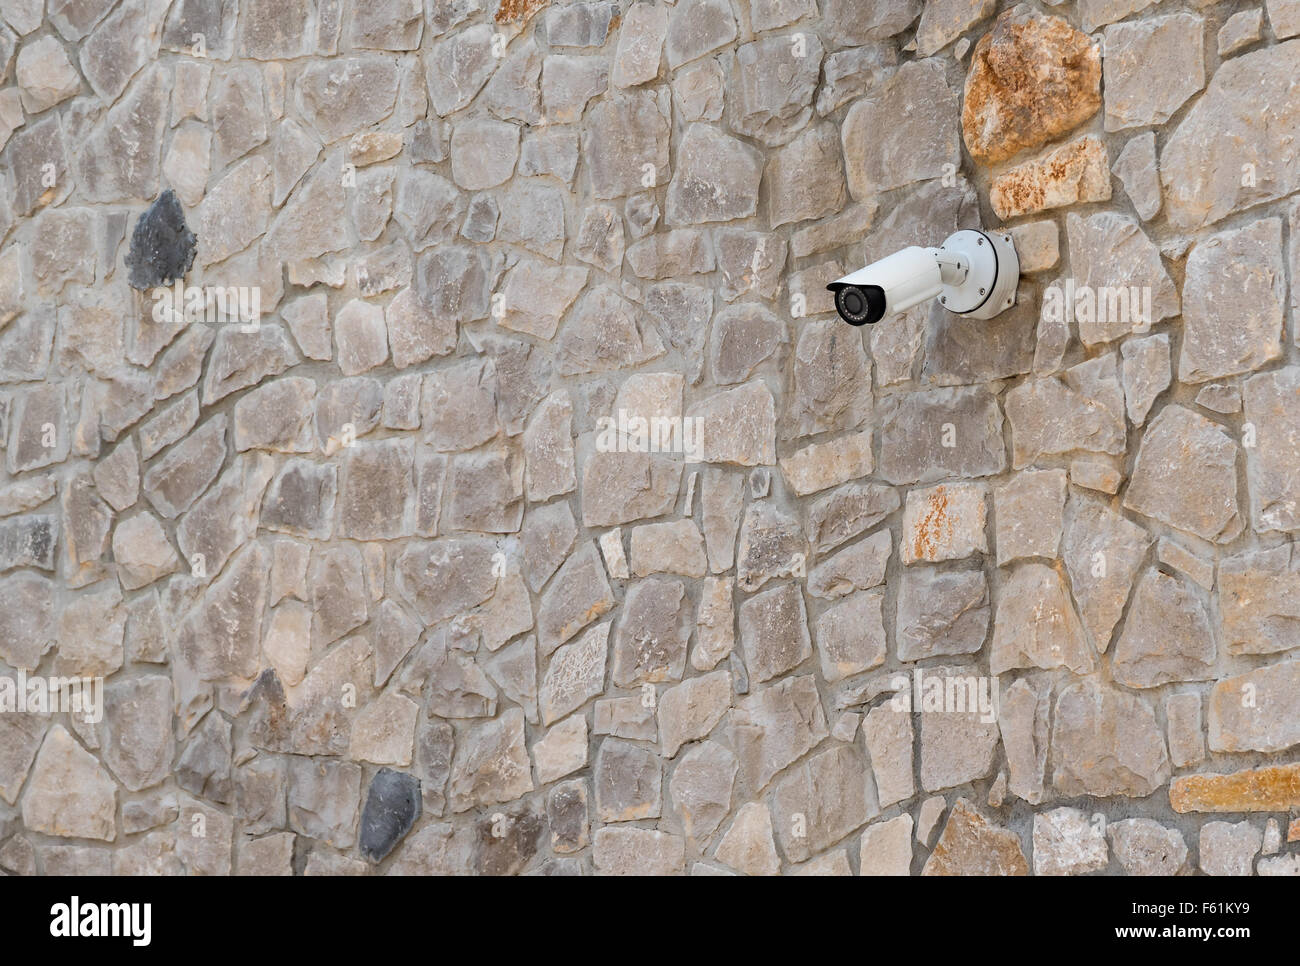 security camera on a stone wall Stock Photo